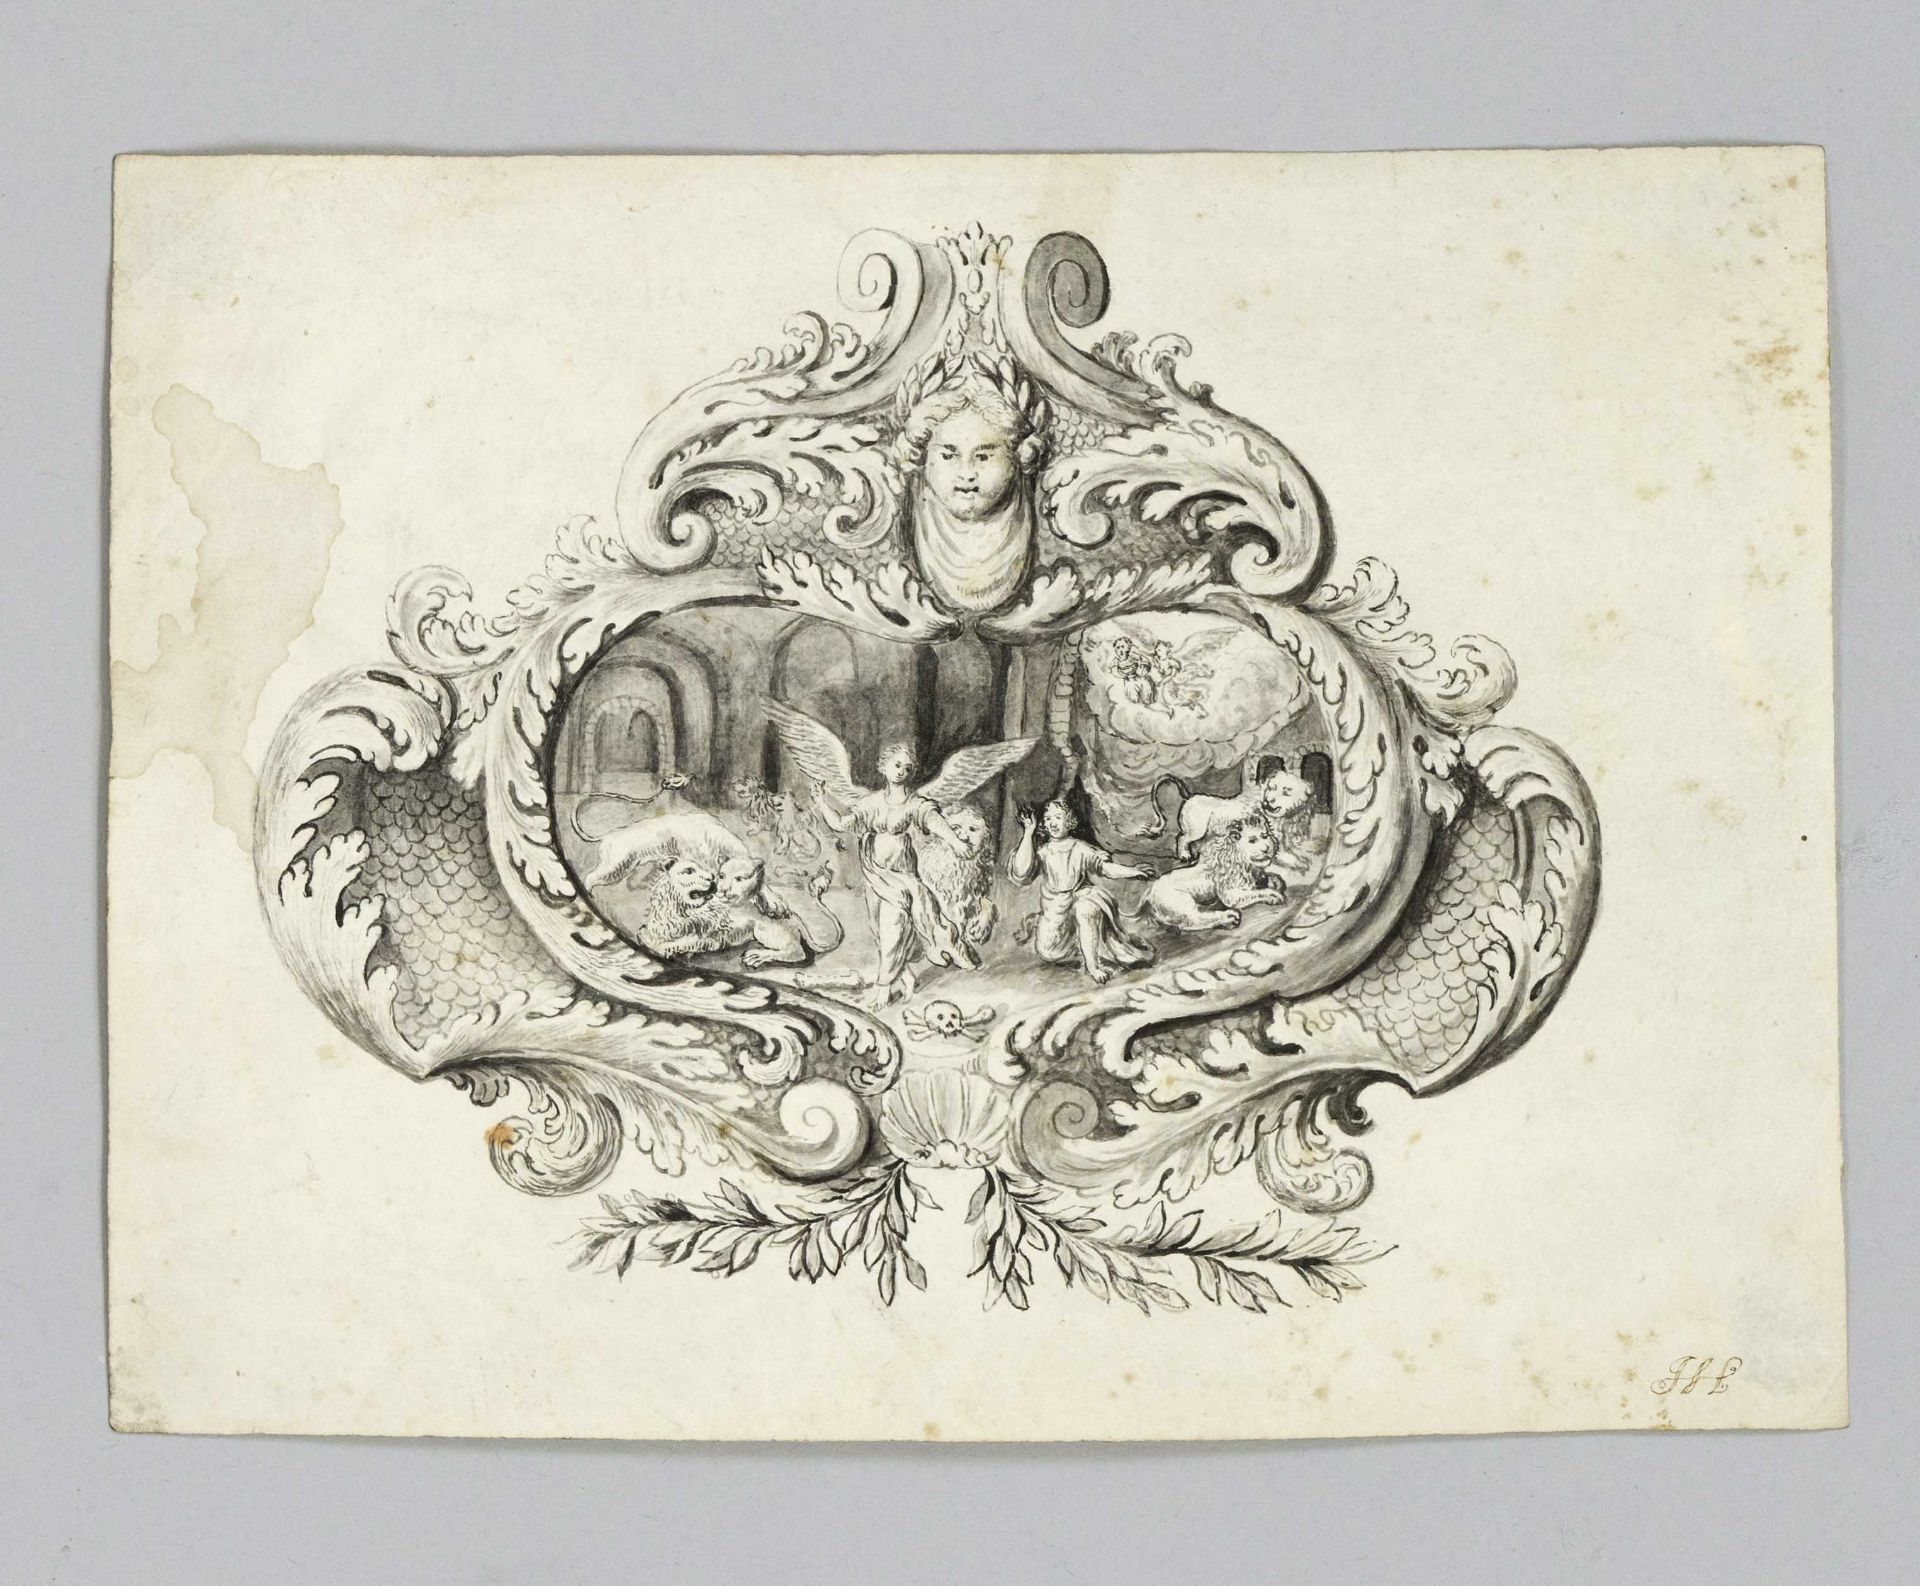 German School 17th/early 18th century, Study of an elaborately ornamented cartouche depicting Daniel